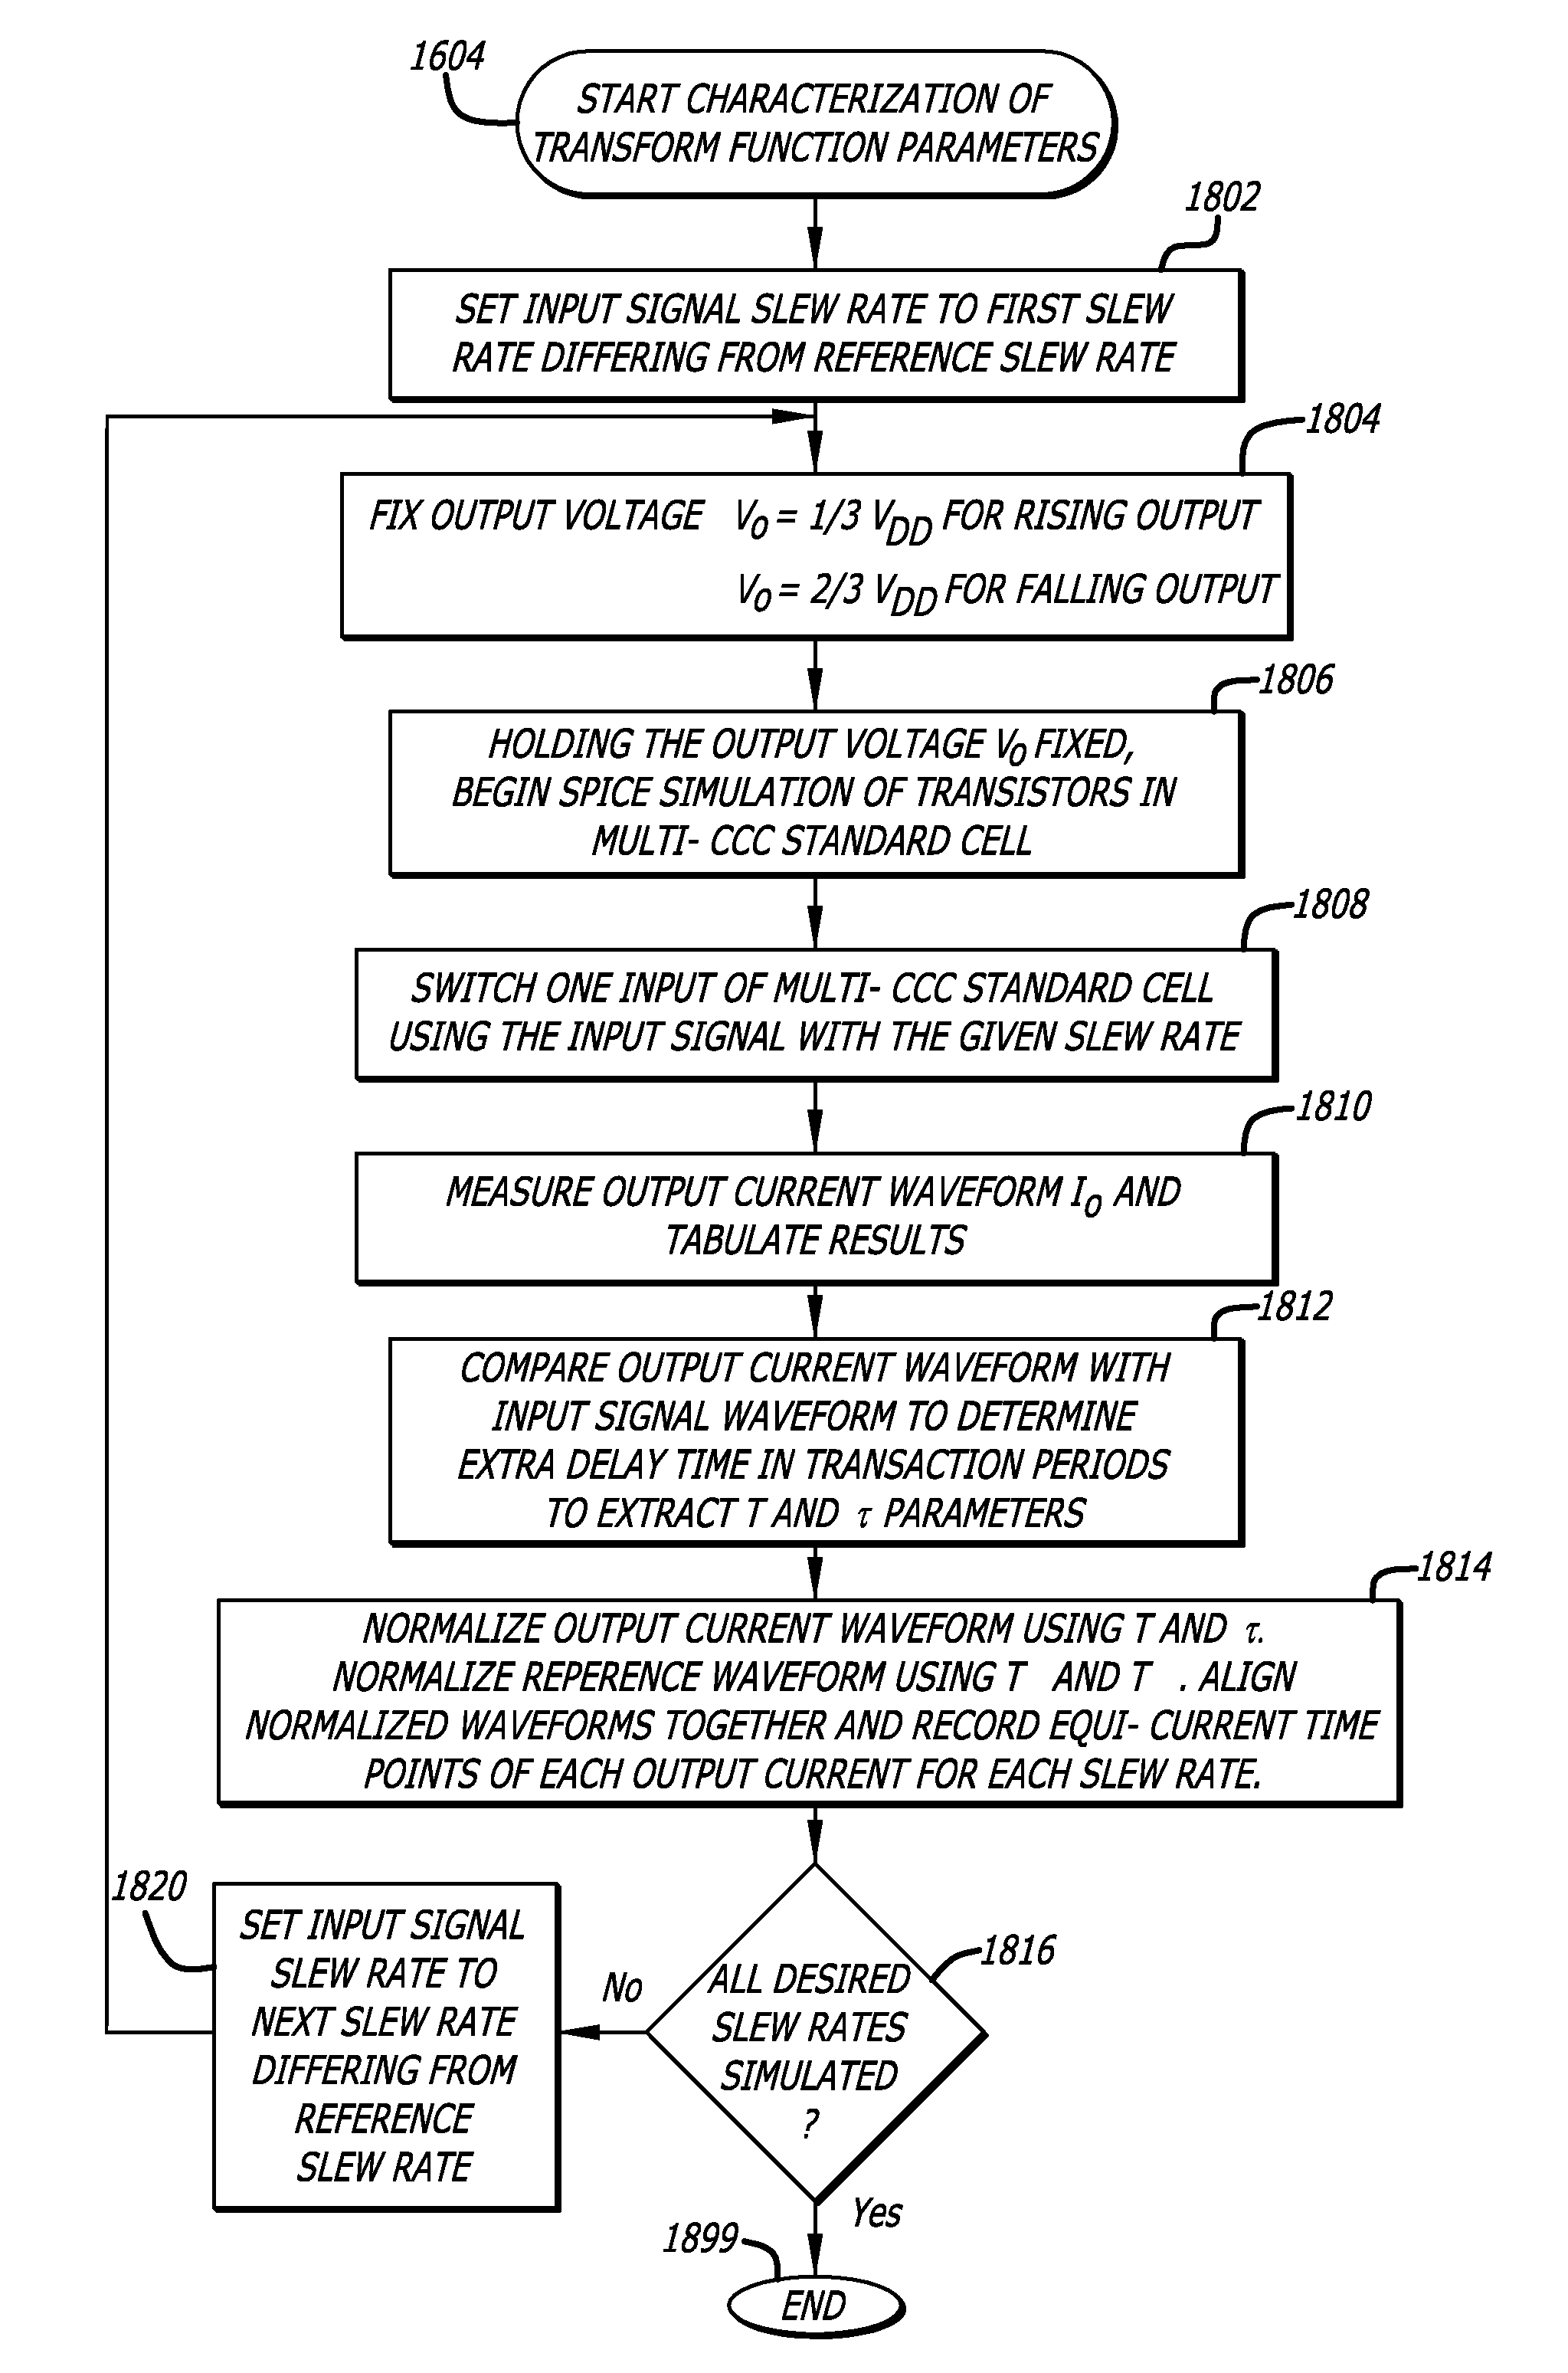 Sensitivity and static timing analysis for integrated circuit designs using a multi-CCC current source model